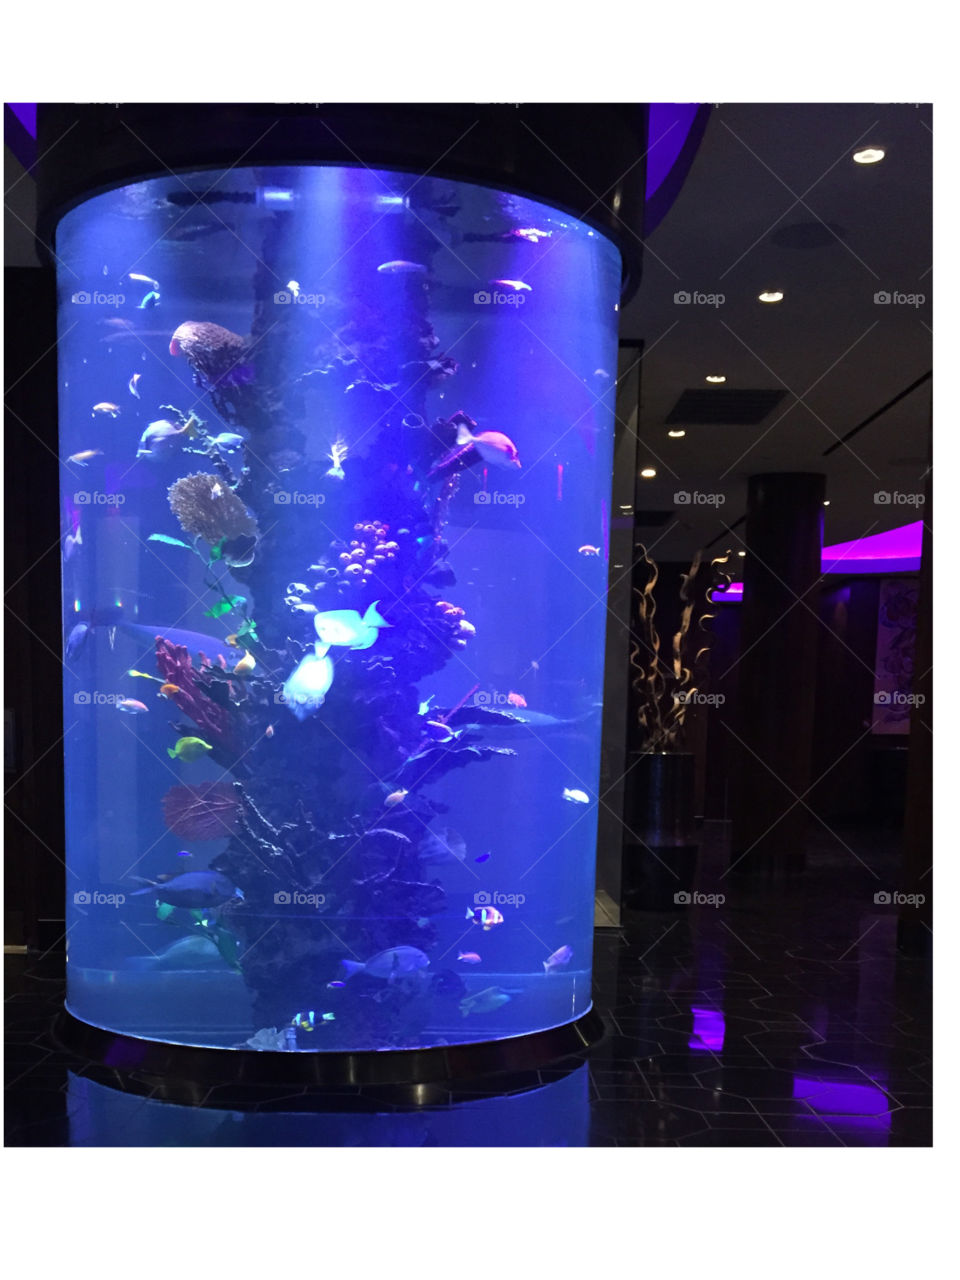 Aqua tank. Cool aquarium tank at a lobby of a cool hotel, good cleanse energy with much acceptance and compassion. 